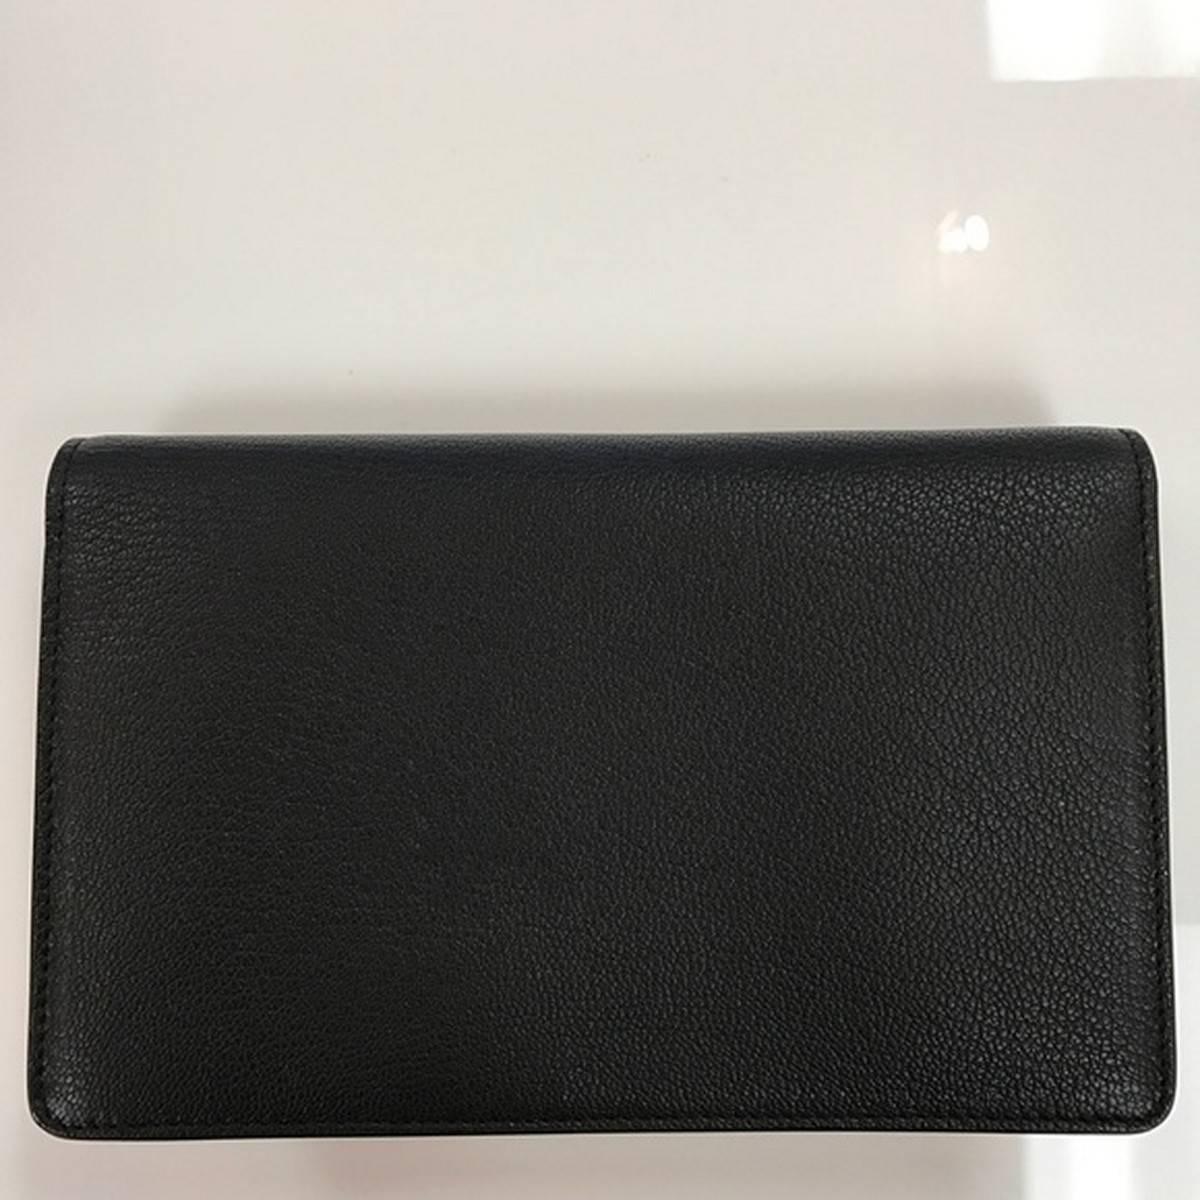 Givenchy Wallet On Chain Clutch Black
Color: Black
Size: OS

Beautiful design with detachable silver metal chain
Made in Italy.